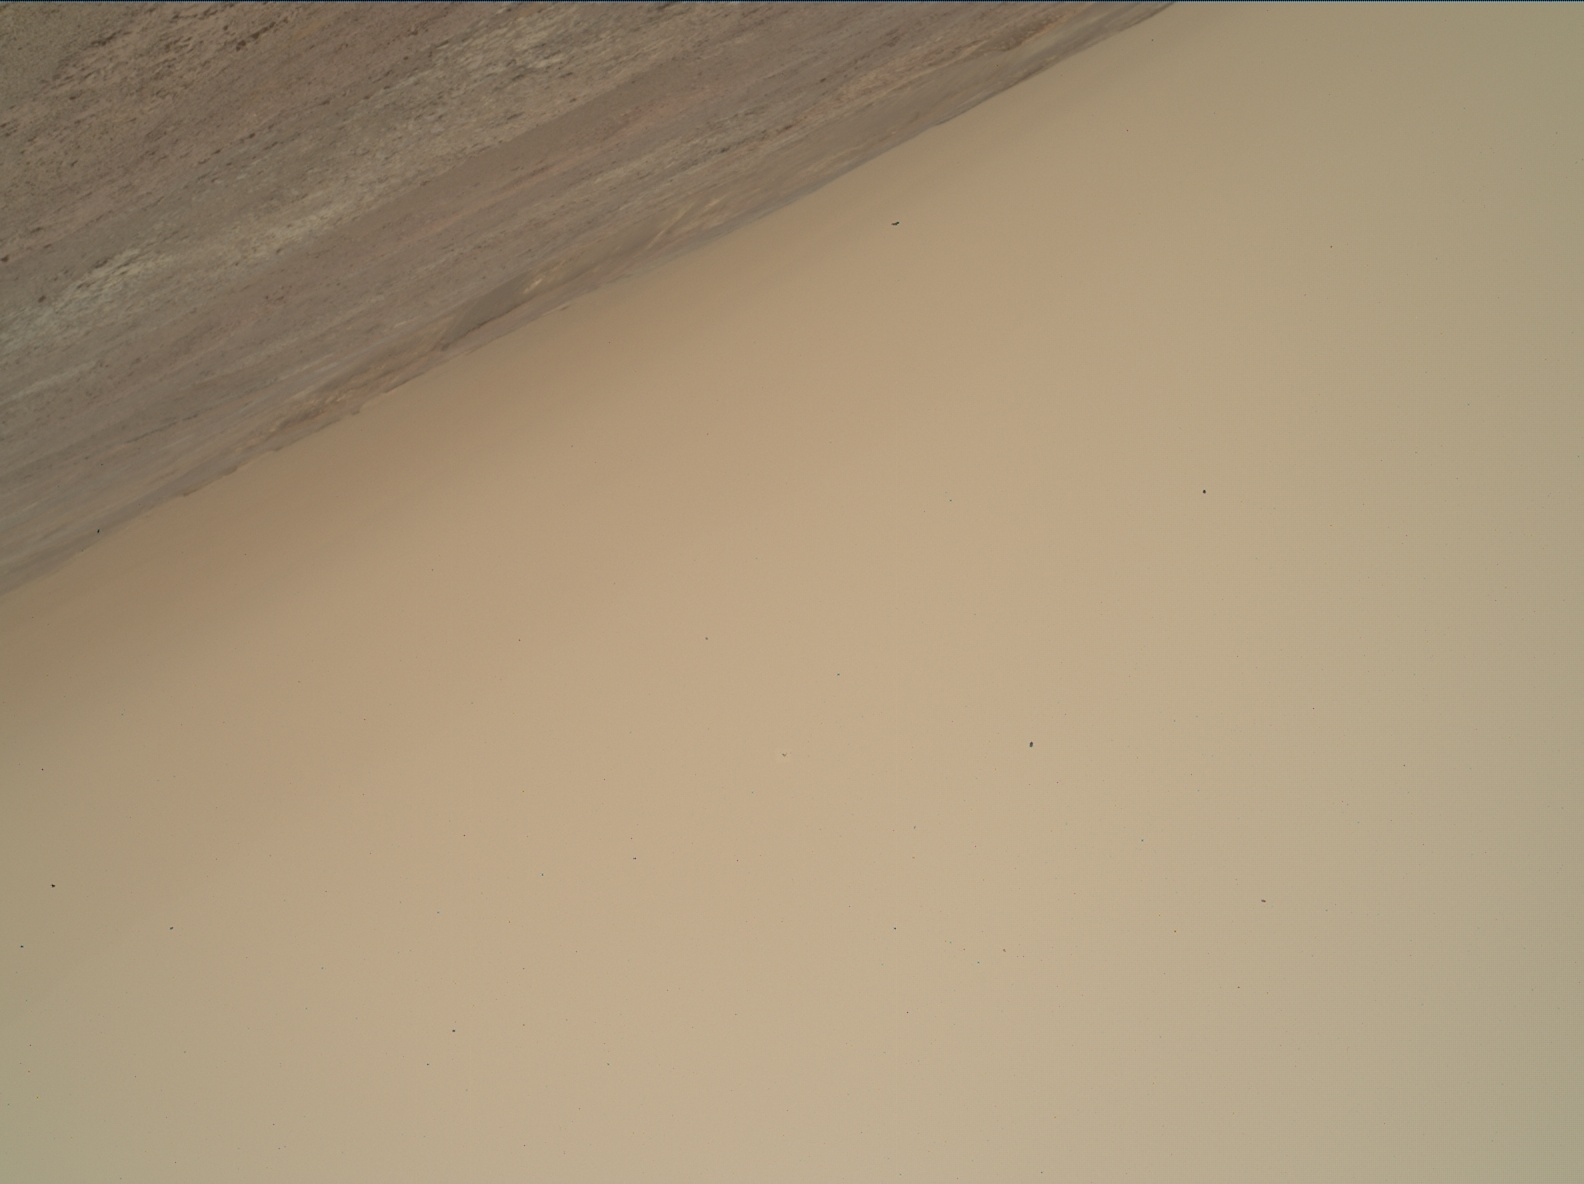 Nasa's Mars rover Curiosity acquired this image using its Mars Hand Lens Imager (MAHLI) on Sol 2291